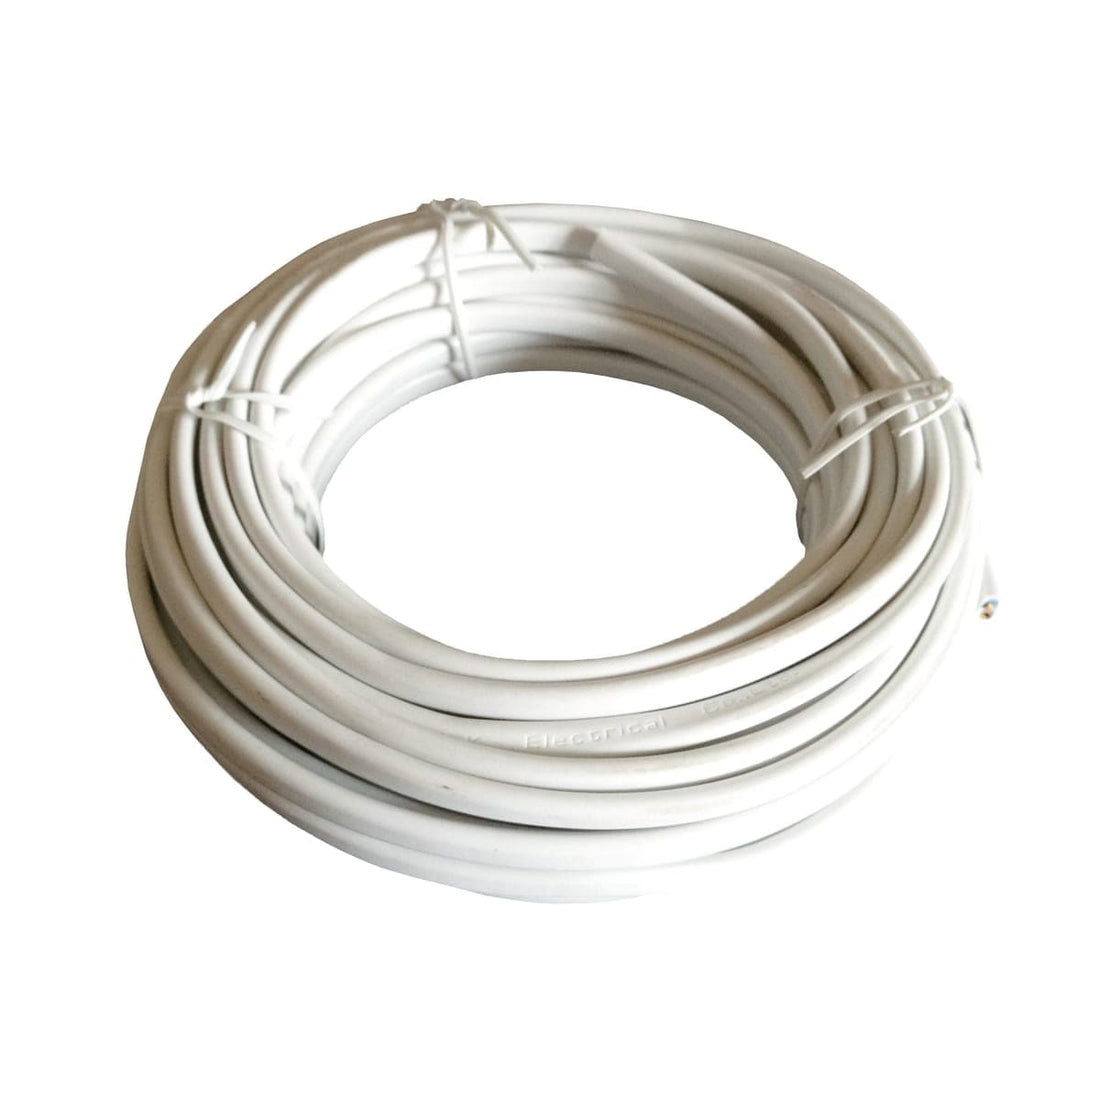 HANK ELECTRICAL CABLE H05VV-F 10 M 3X0.75 WHITE - best price from Maltashopper.com BR420202050